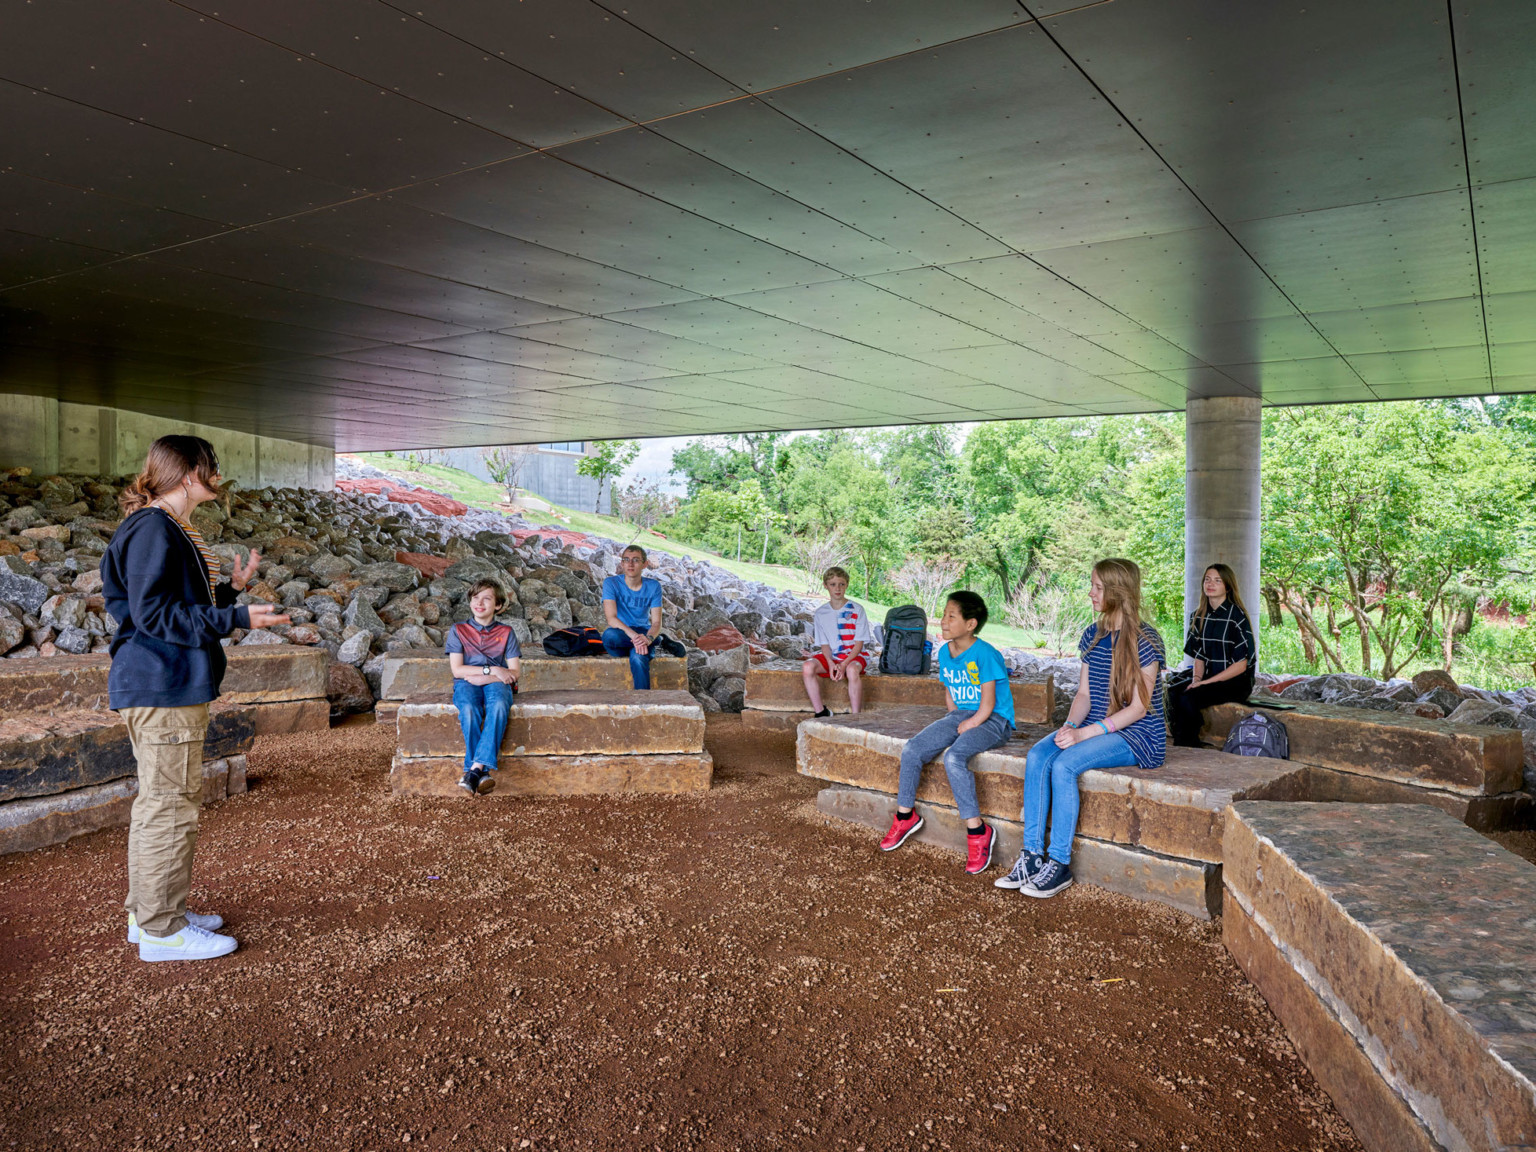 Outdoor learning space with rock benches arranged in semi circle, covered by hallway and open at sides